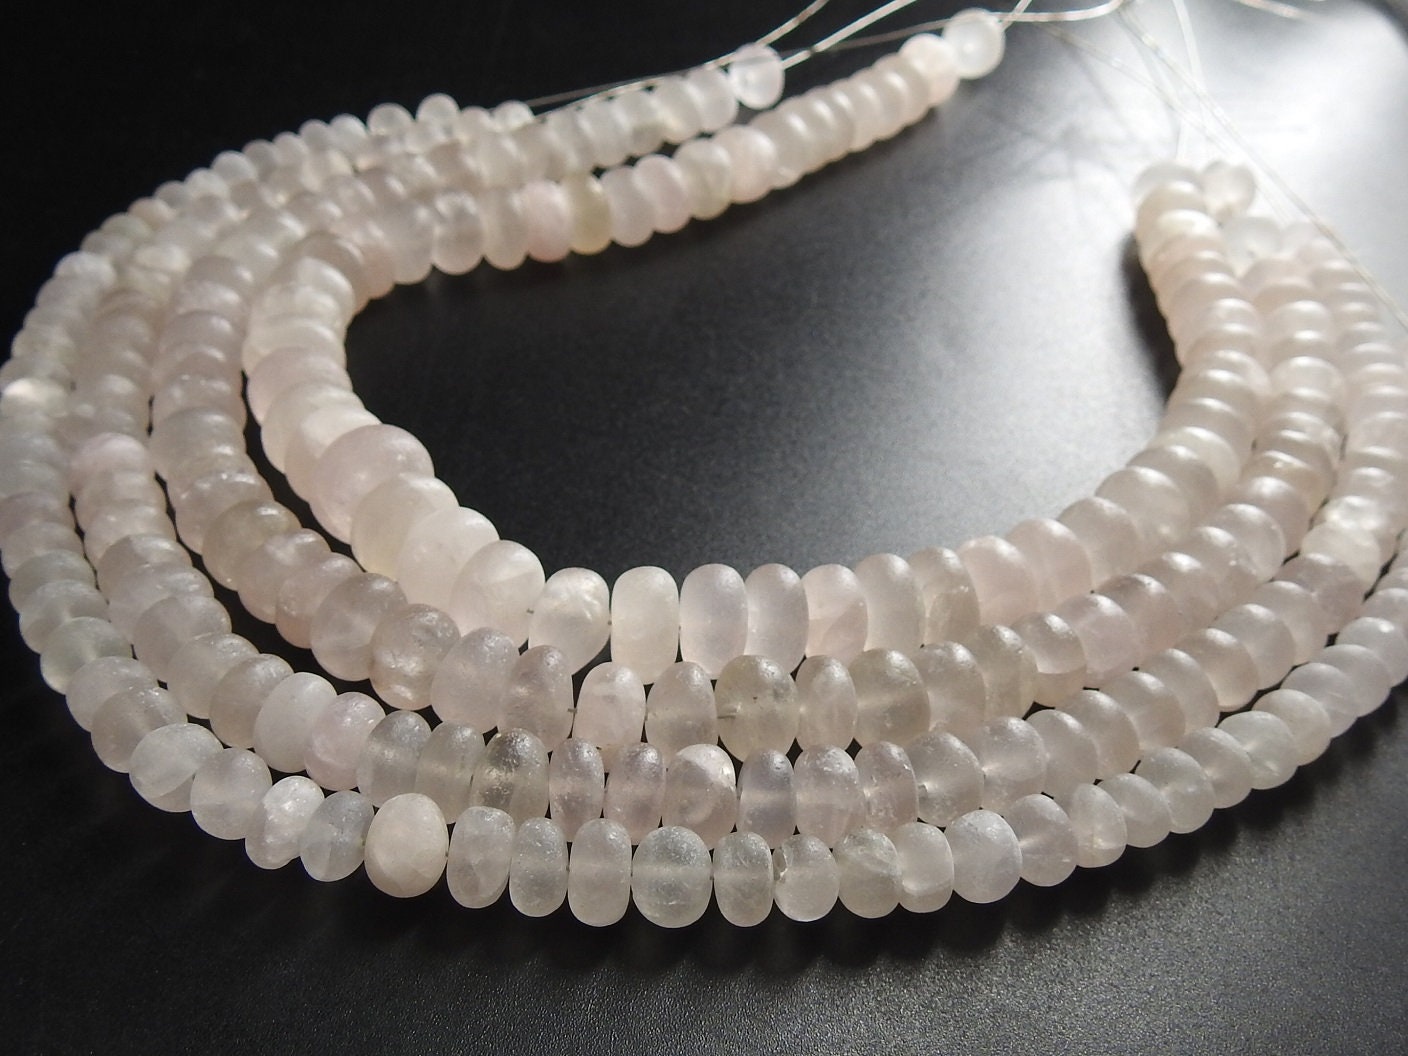 12 Inch Strand Natural Rose Quartz Smooth Matte Polished Roundel Beads Wholesale Price New Arrival B3 | Save 33% - Rajasthan Living 14